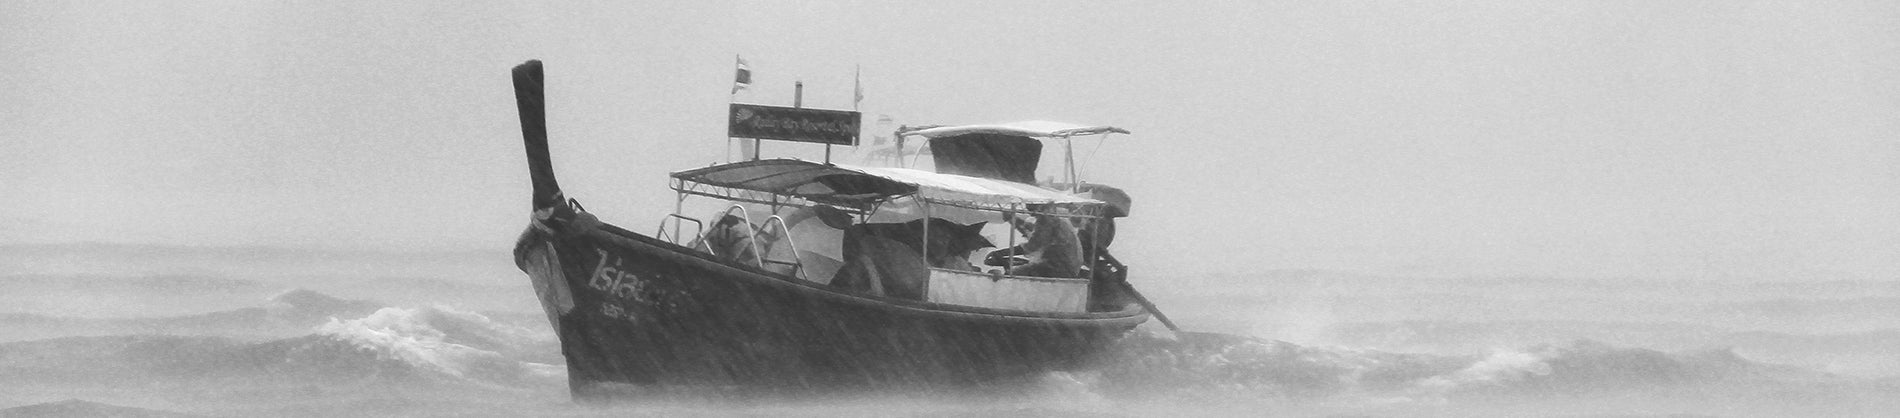 A black and white photo of a boat in the middle of a storm